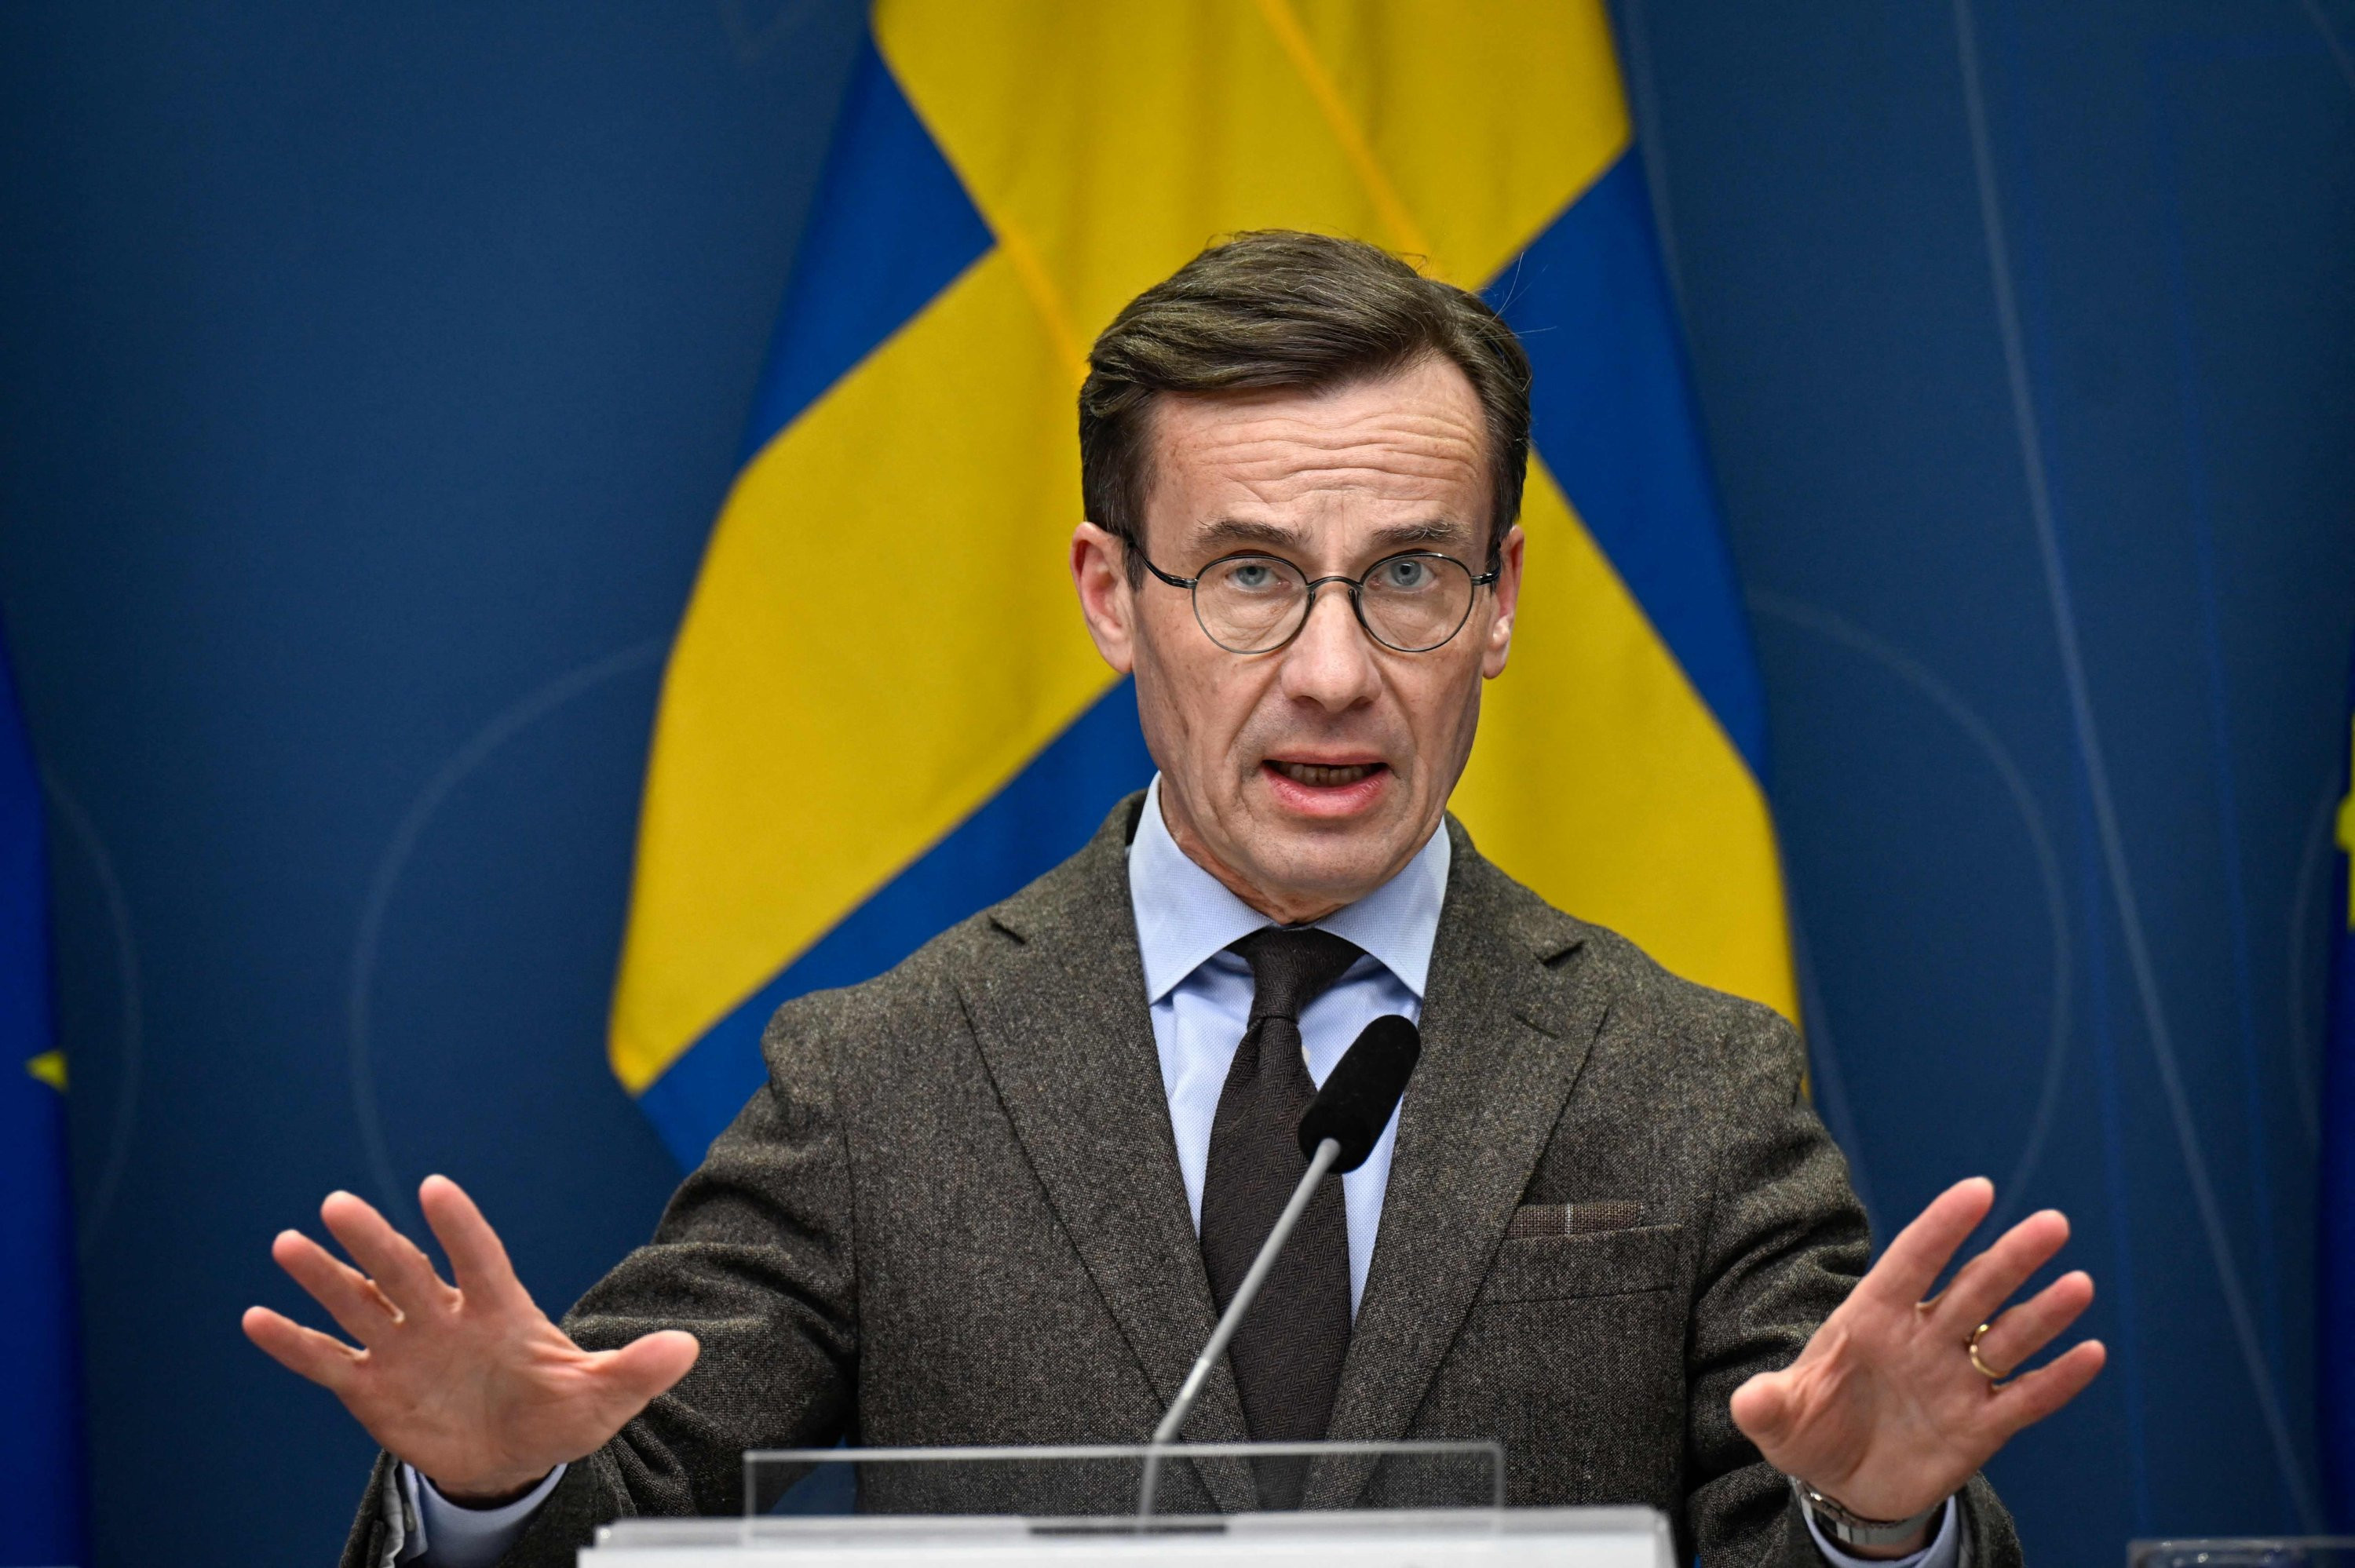 Swedish Prime Minister Says He Is Worried About The Burning Of The Koran In The Country Daily News